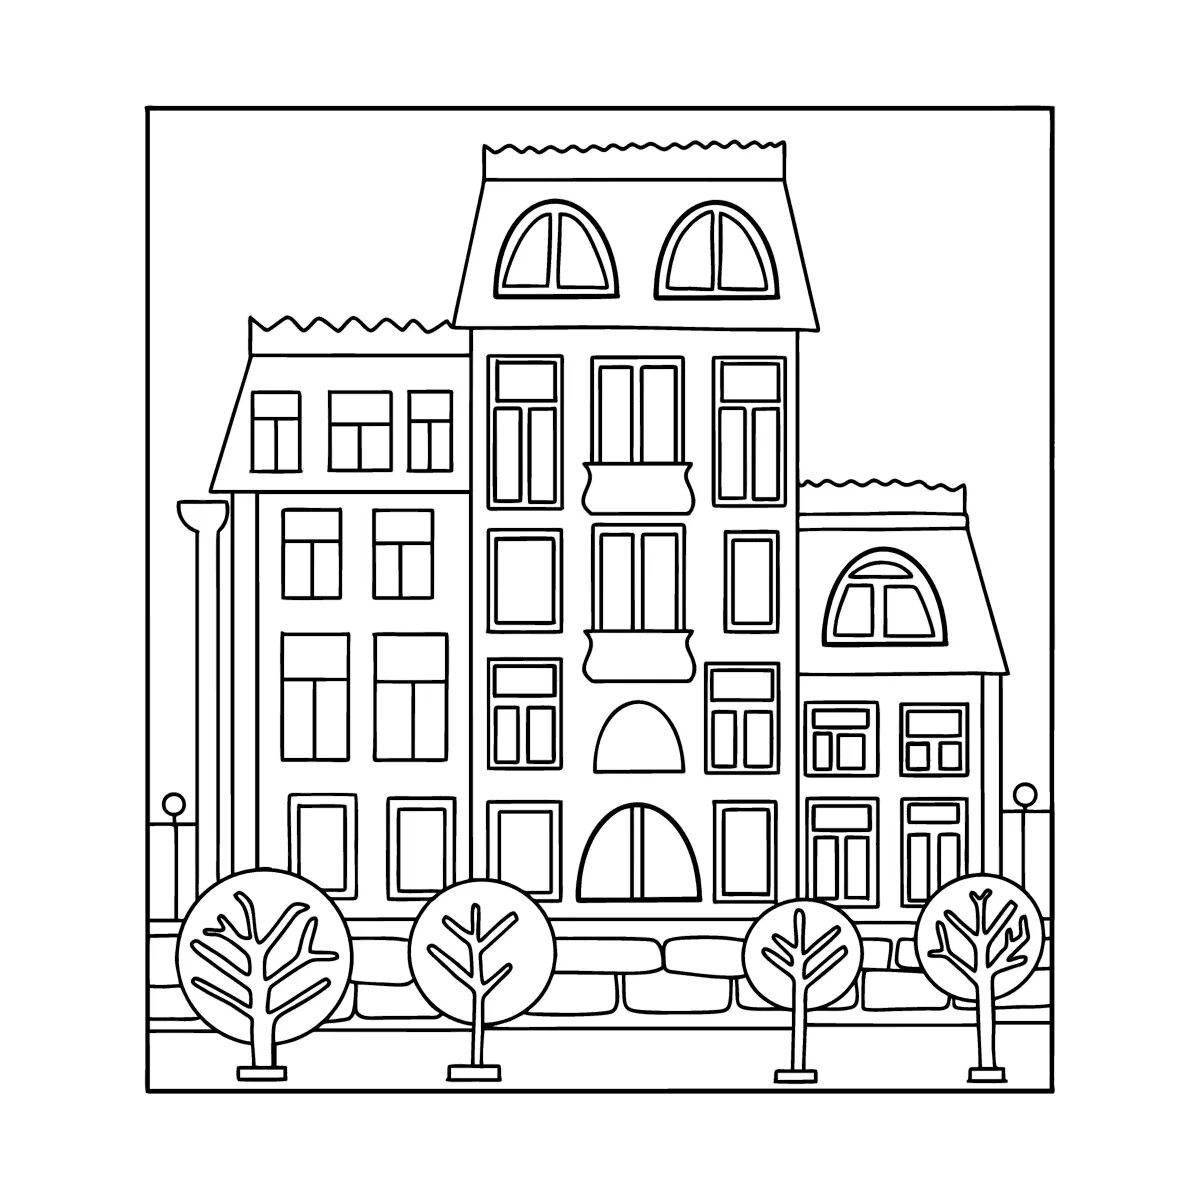 Luxury high rise buildings coloring book for kids